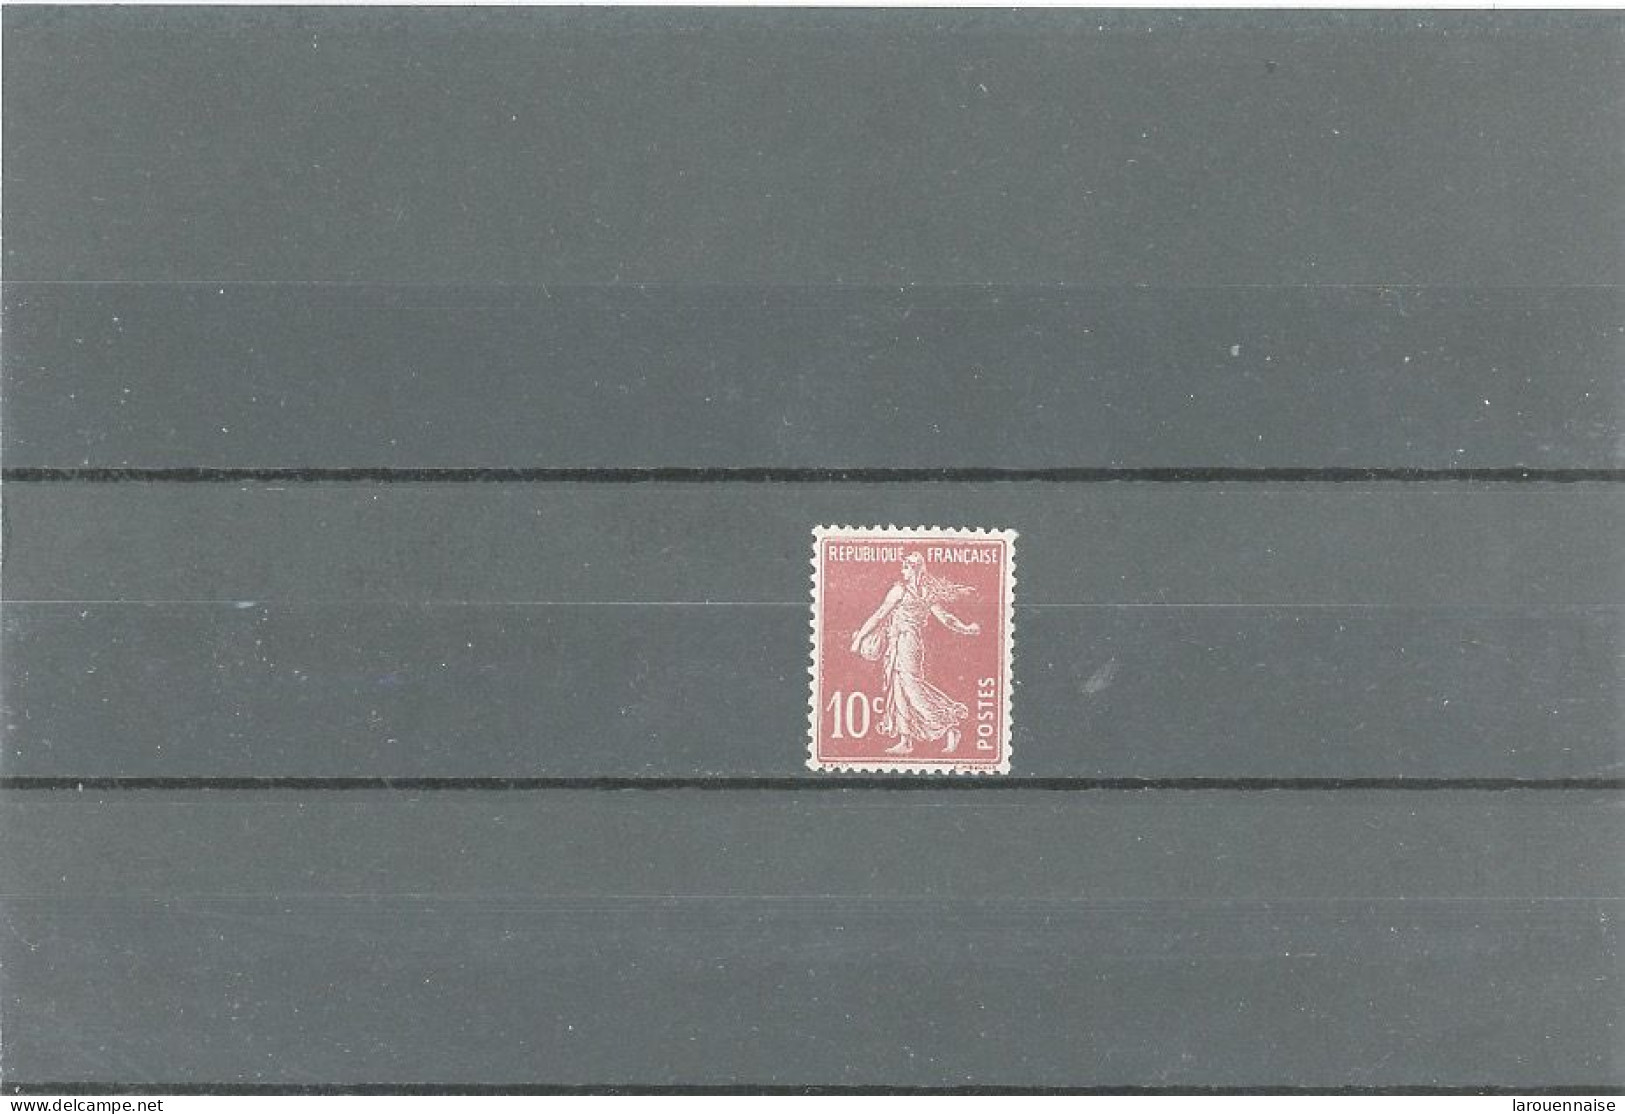 SEMEUSE CAMEE - N°138 -NSG -10c ROUGE TYPE I A- IMPRESSION RECTO -VERSO - Unused Stamps